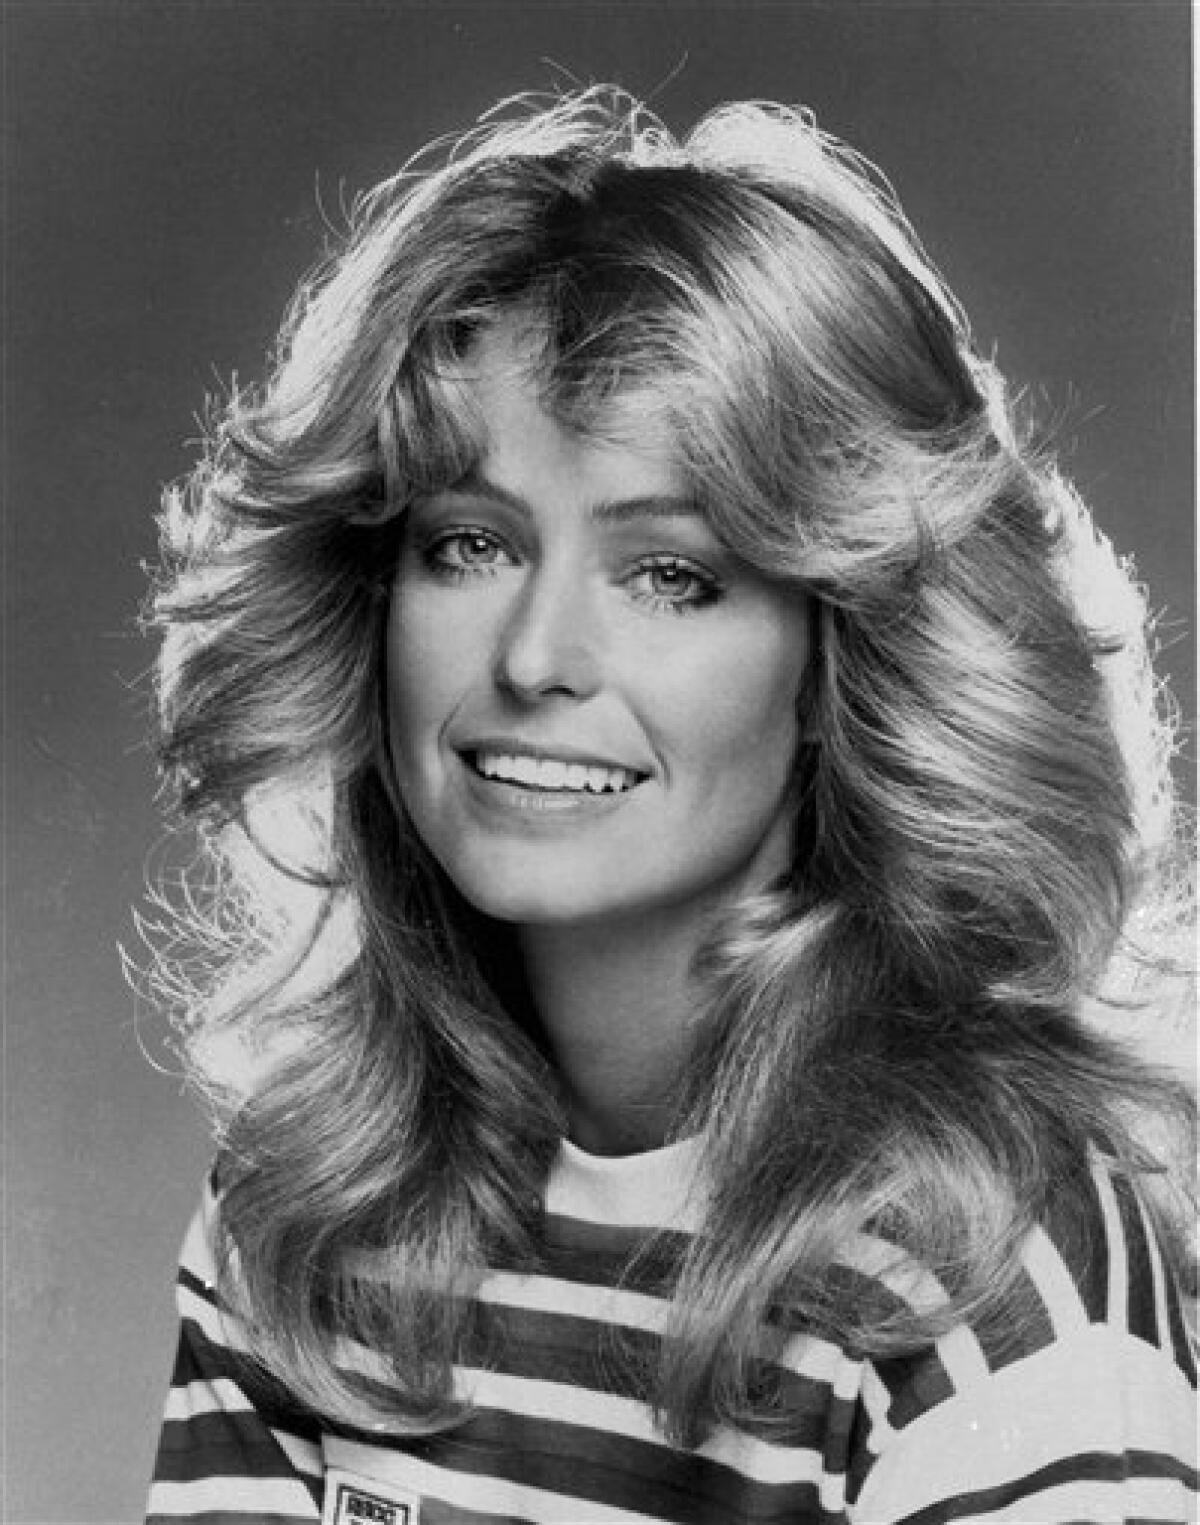 FILE - In this Jan. 1977 file photo originally released by ABC, actress Farrah Fawcett-Majors from "Charlie's Angels" is shown. Fawcett died Thursday, June 25, 2009, at a hospital in Los Angeles. She was 62. (AP Photo/ABC, file)